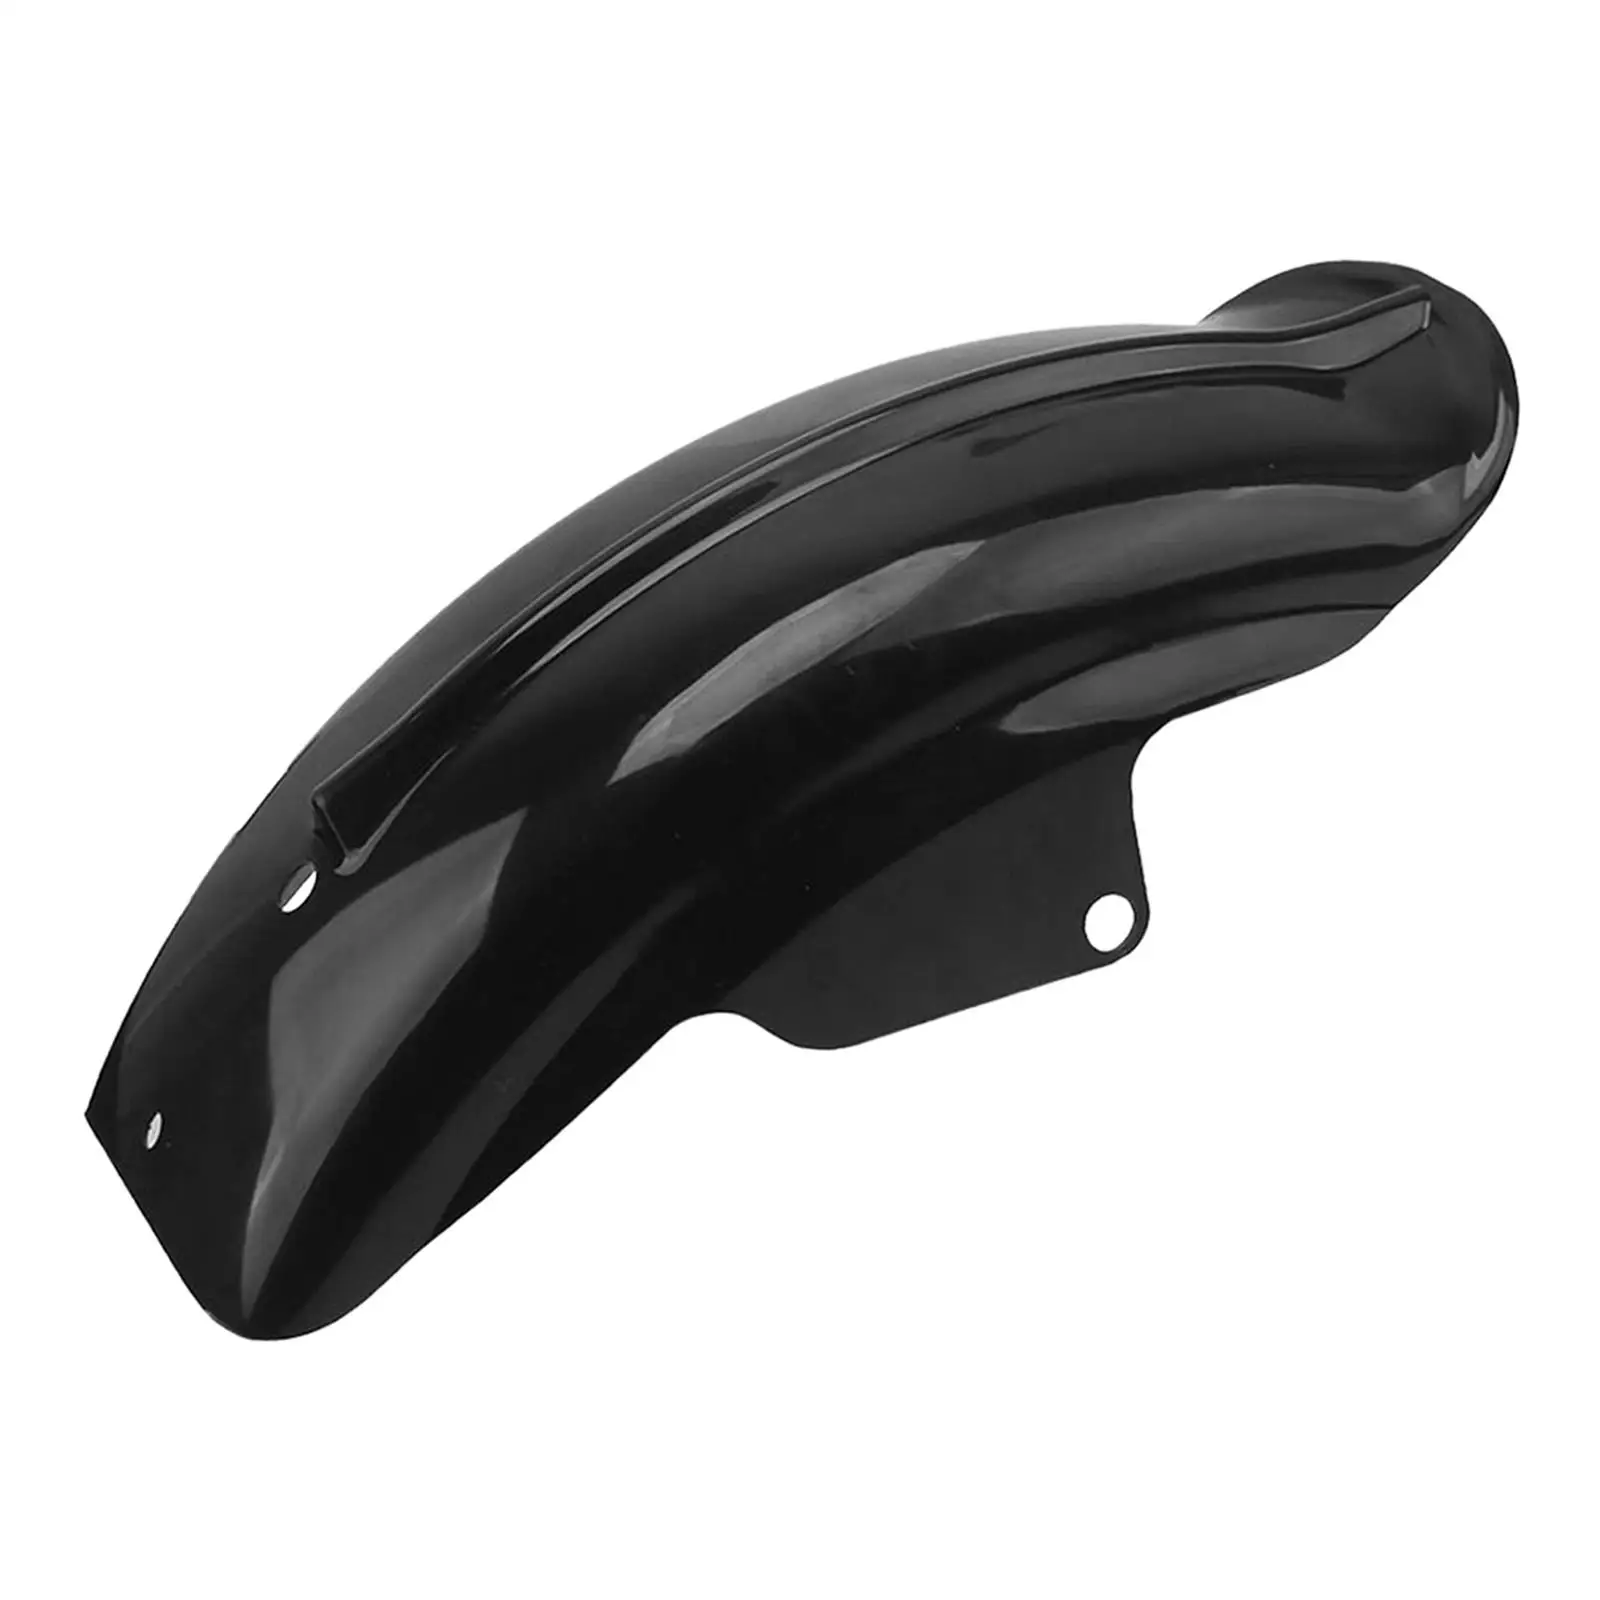 

Rear Fender Protector Motorbike Accessories Black Mudguard Fairing for Harley XL1200 Sportster XL883 Stable Performance Premium